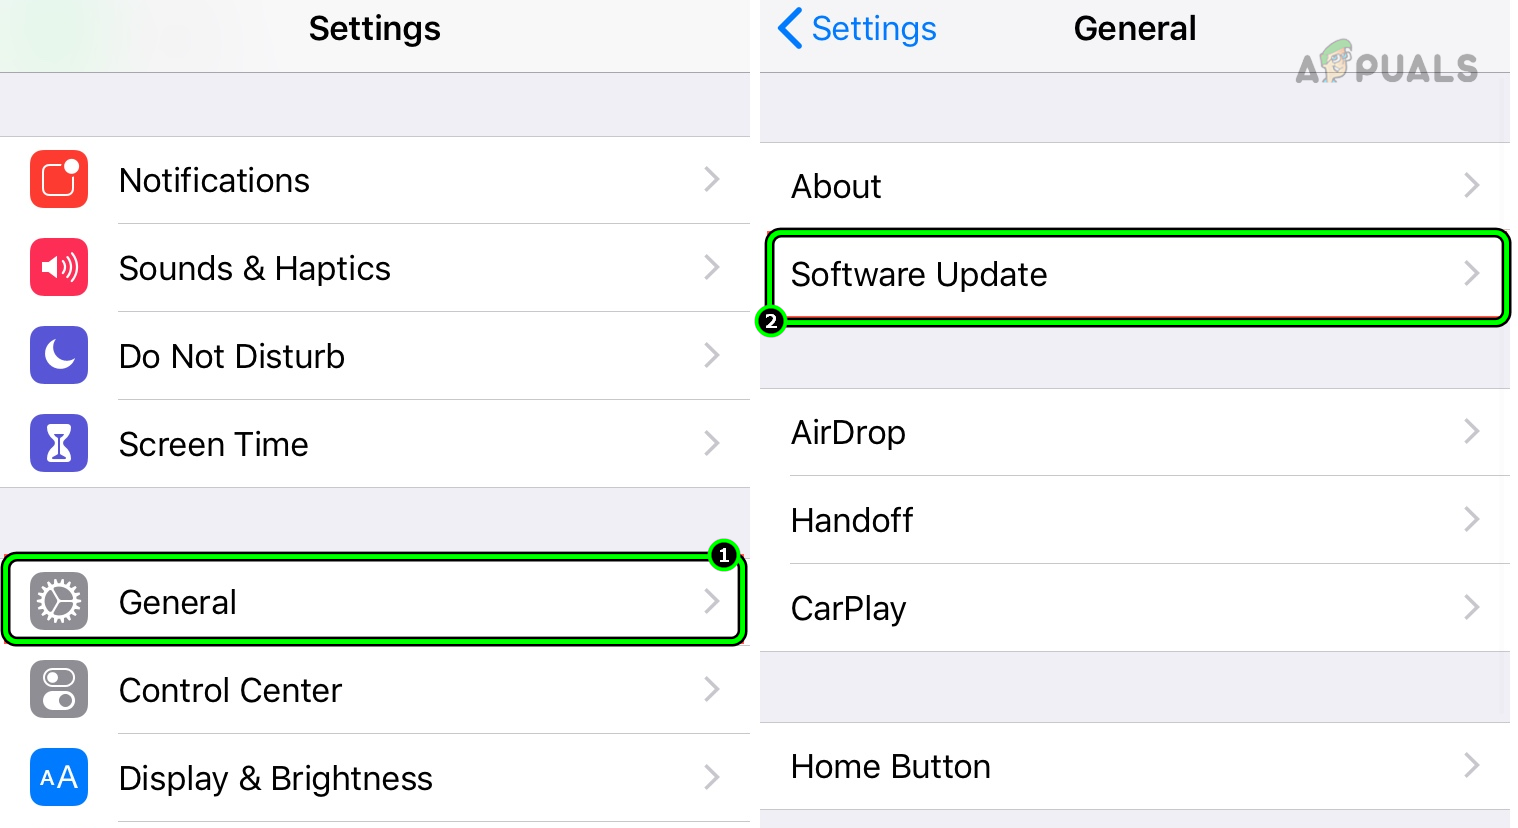 Open Software Update in the iPhone Settings